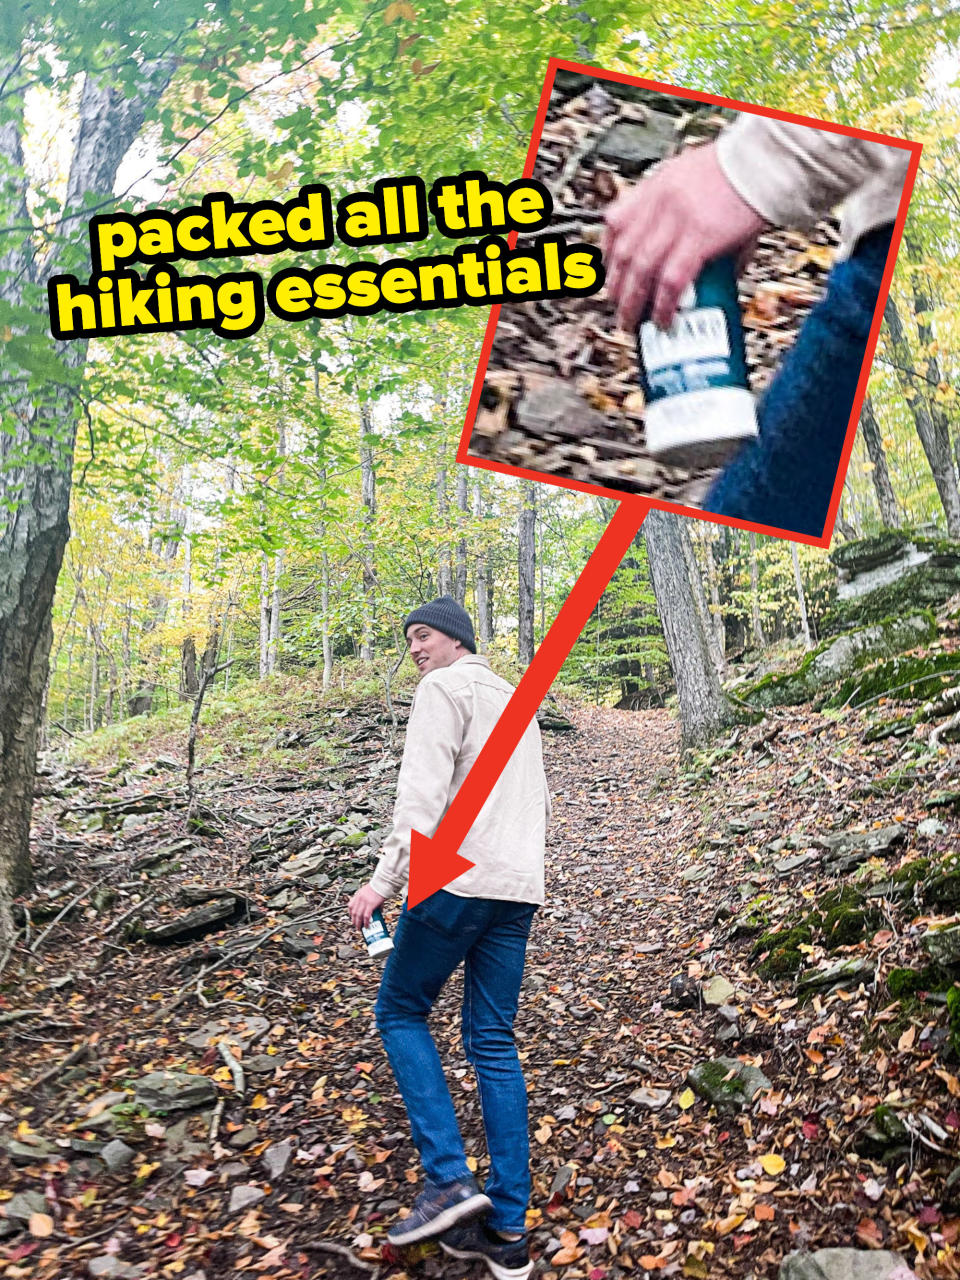 Person hiking in the woods with text "packed all the hiking essentials" and an arrow pointing to the can of Upward Brewing beer they're holding